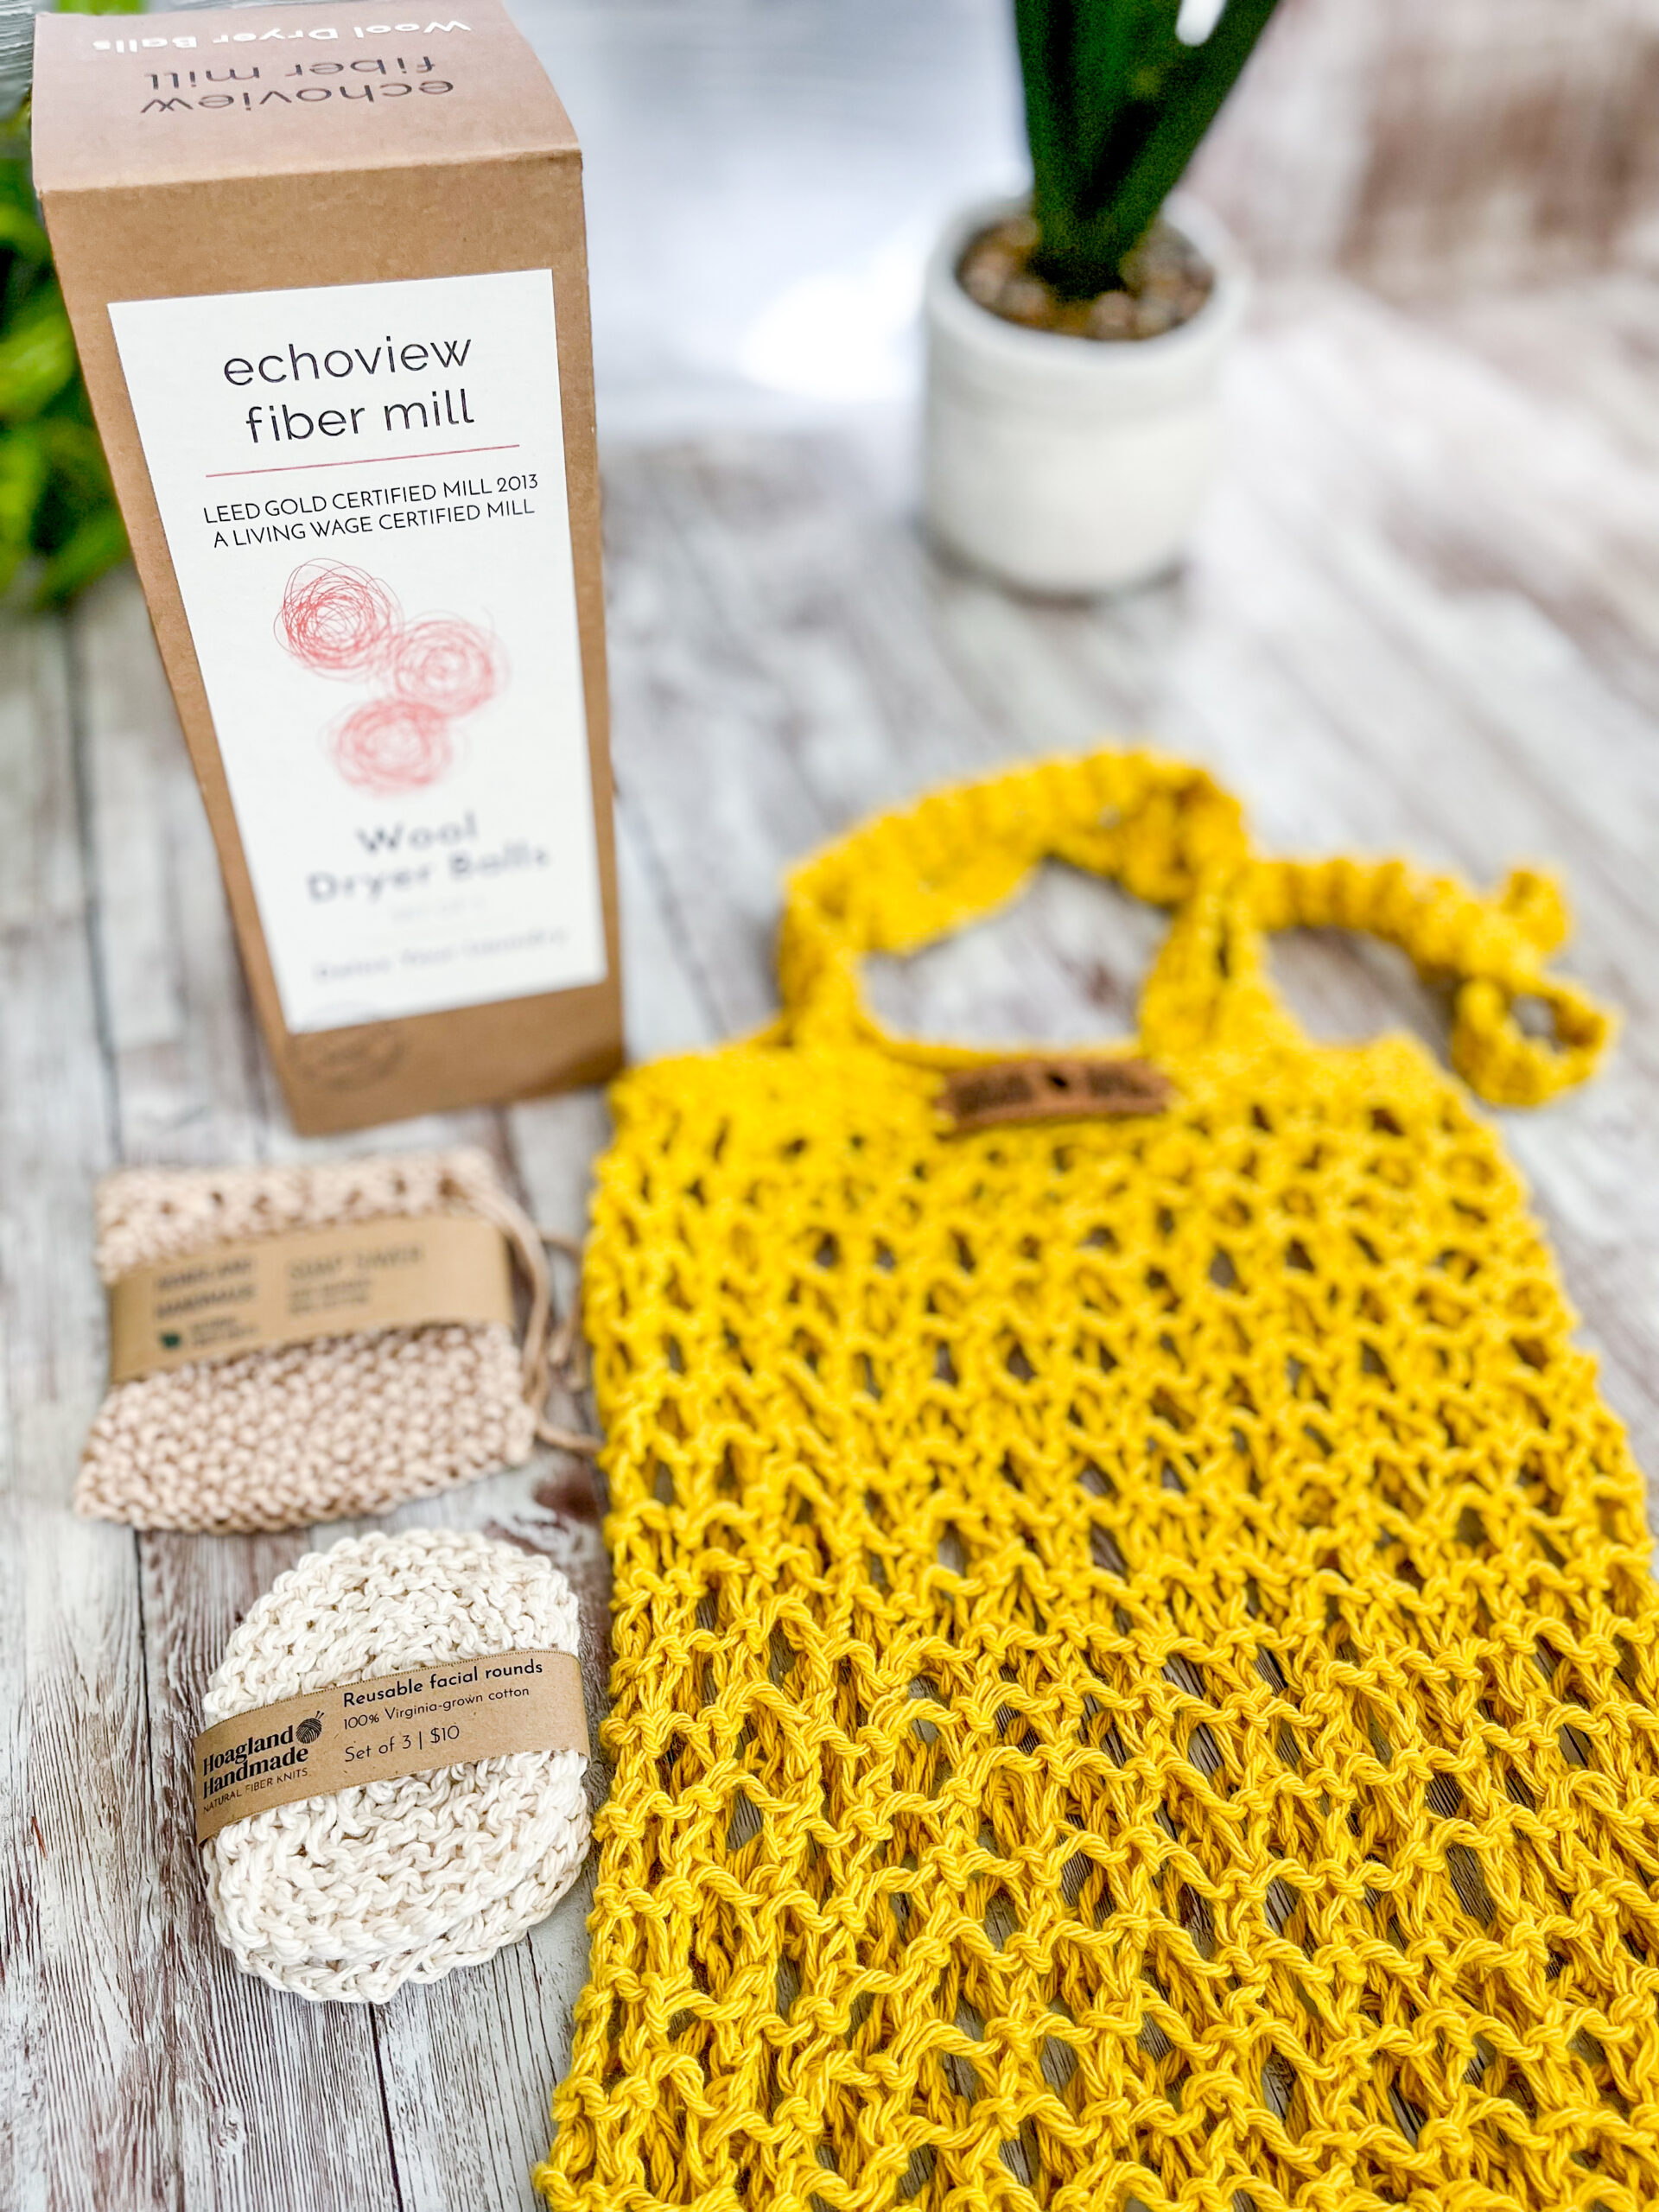 The Zero Waste gift set is pictured showing a box of 3 US Wool dryer balls, a tan bamboo/cotton soap saver pouch wrapped in a kraft paper label from Hoagland Handmade, a set of 3 usable facial rounds knit from Virginia-grown cotton and wrapped in a a kraft paper label from Hoagland Handmade, and a yellow recycled cotton knit market tote